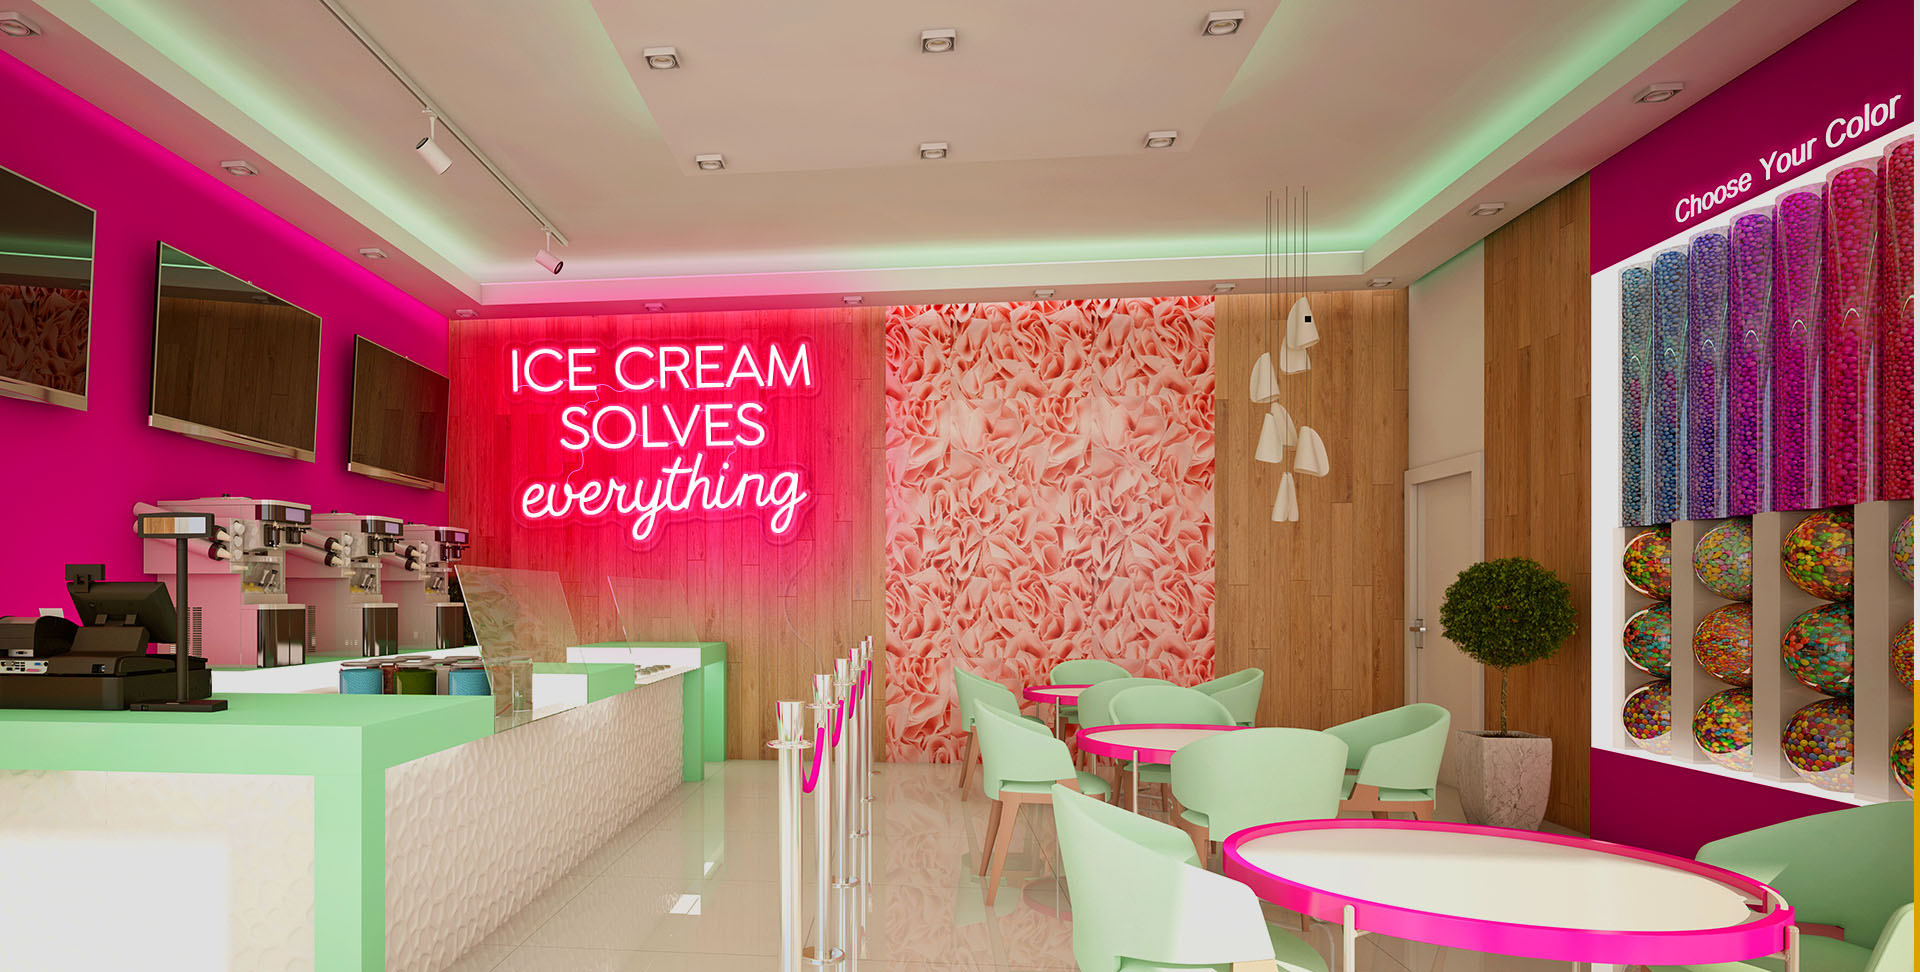 Ice cream solves everything neon wall art